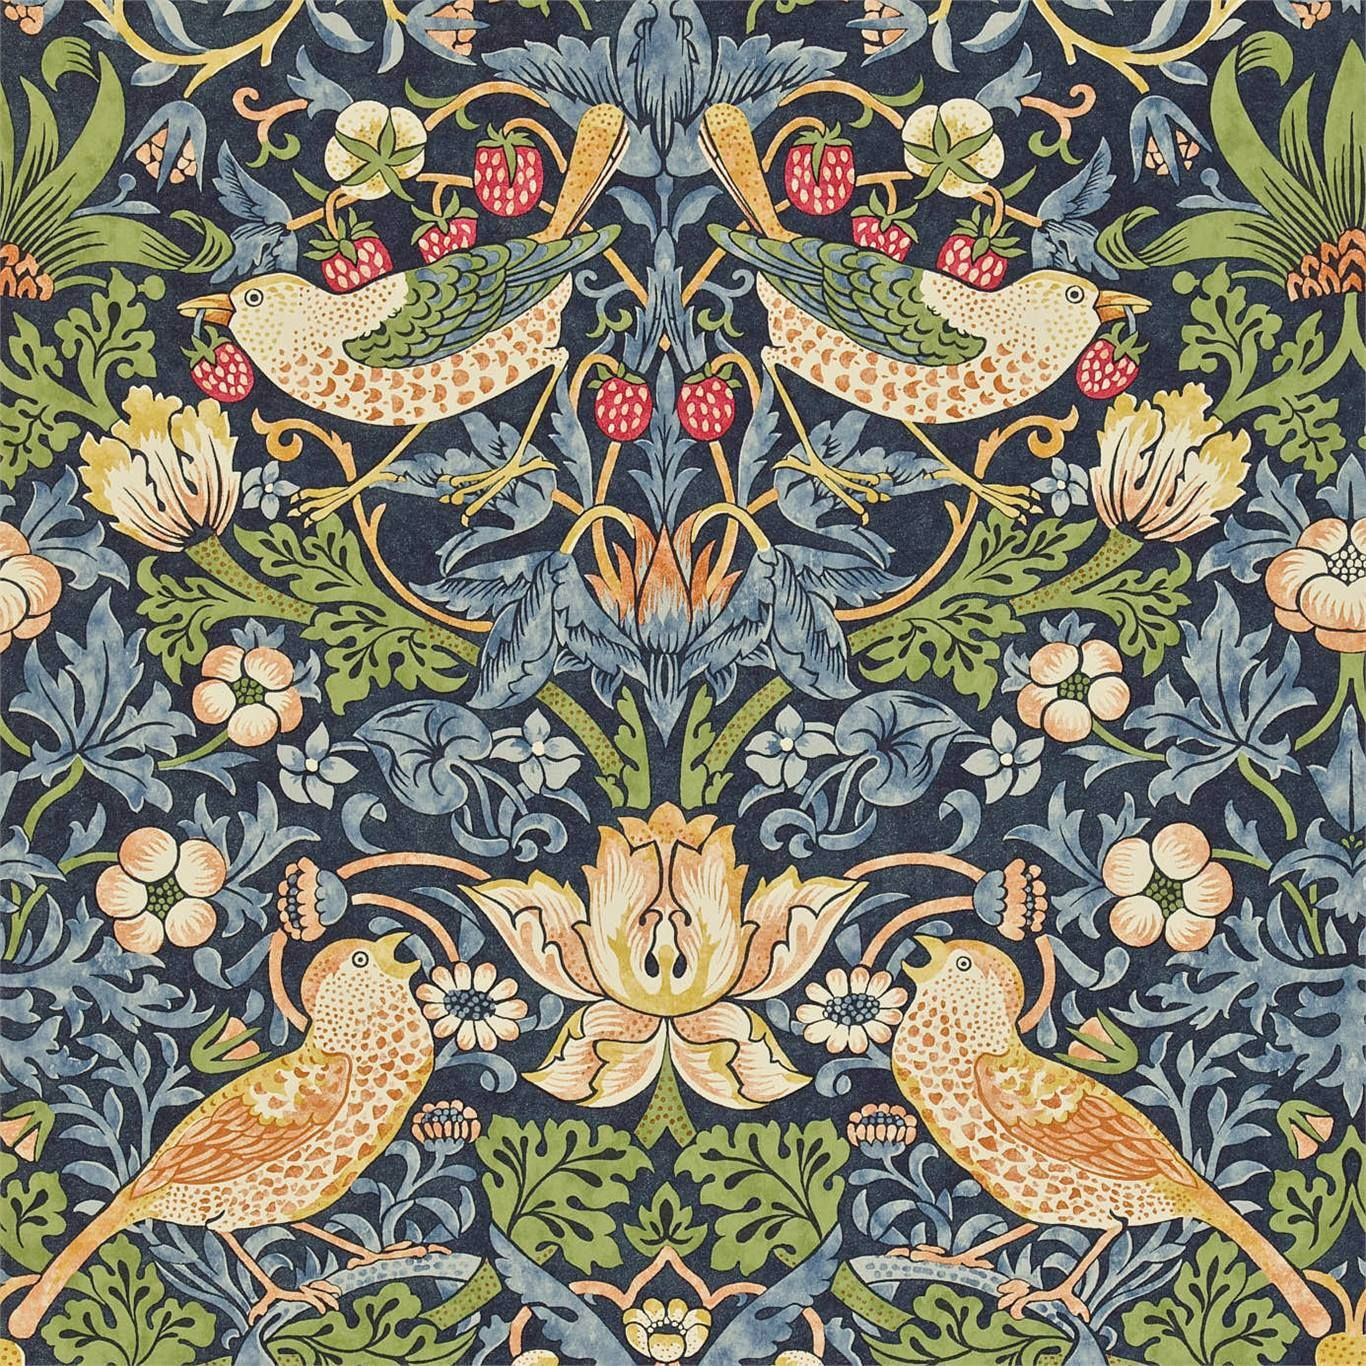 What Was William Morris Style - www.inf-inet.com